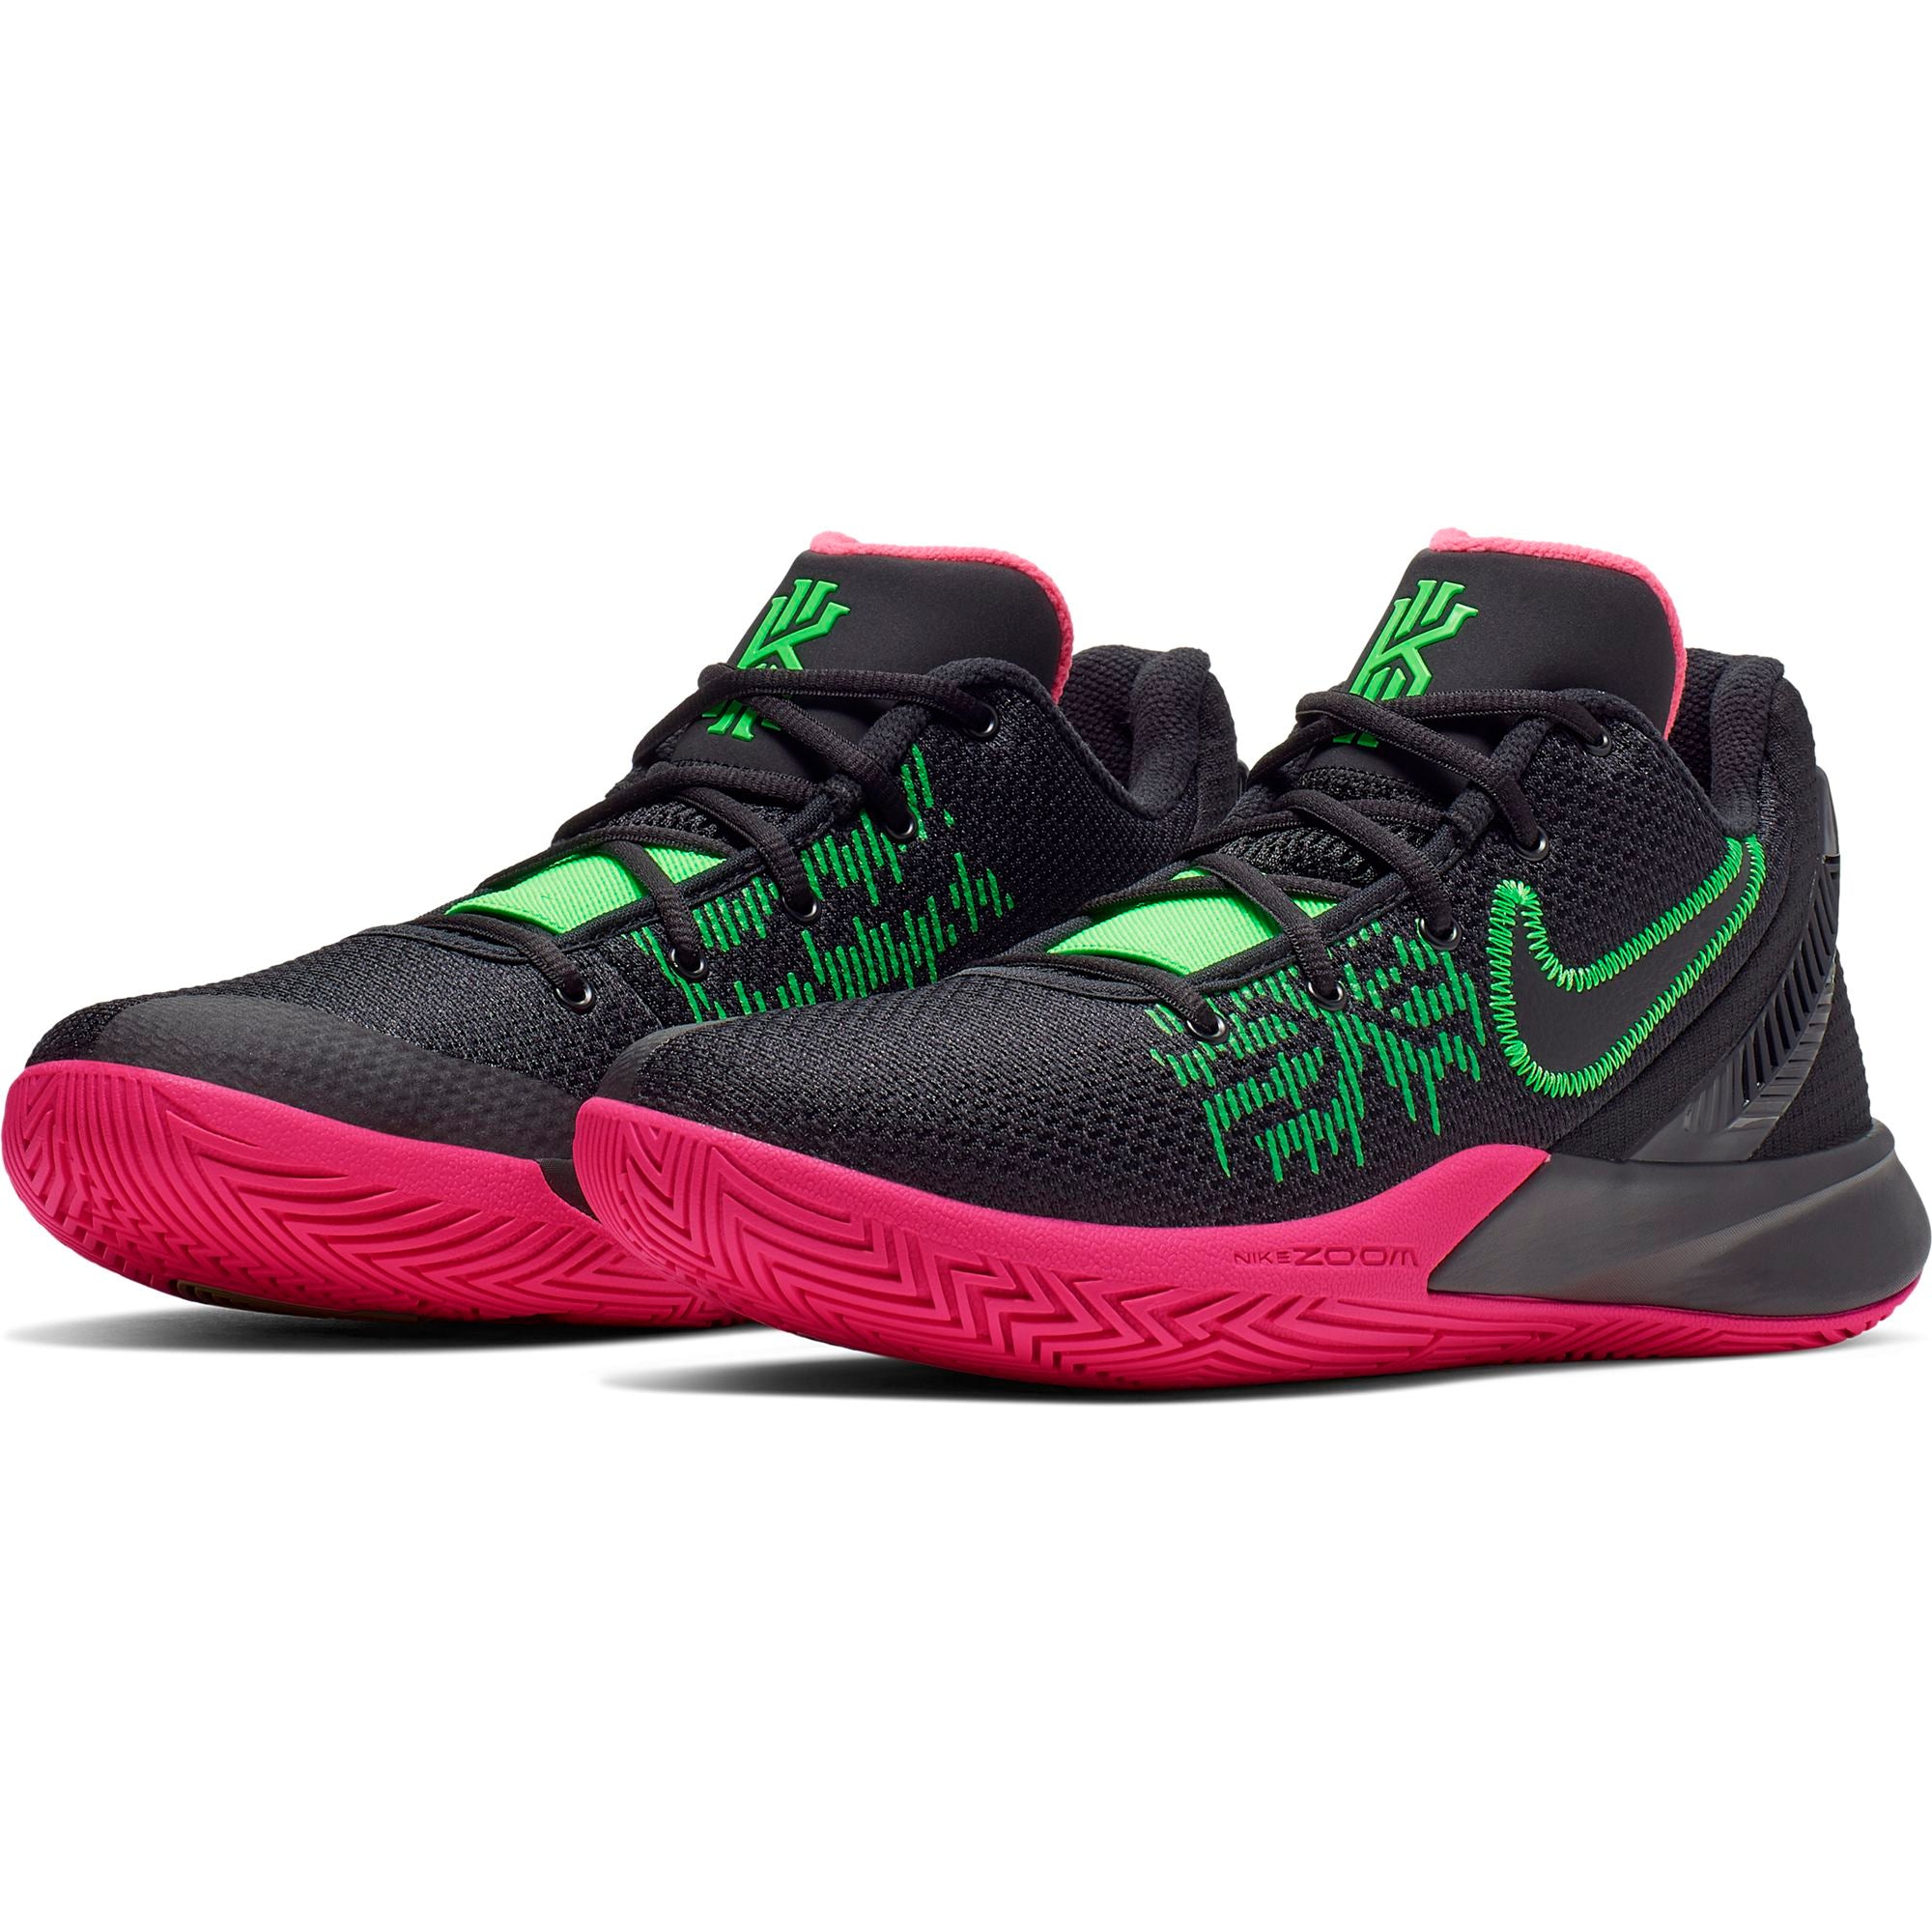 kyrie flytrap black and pink